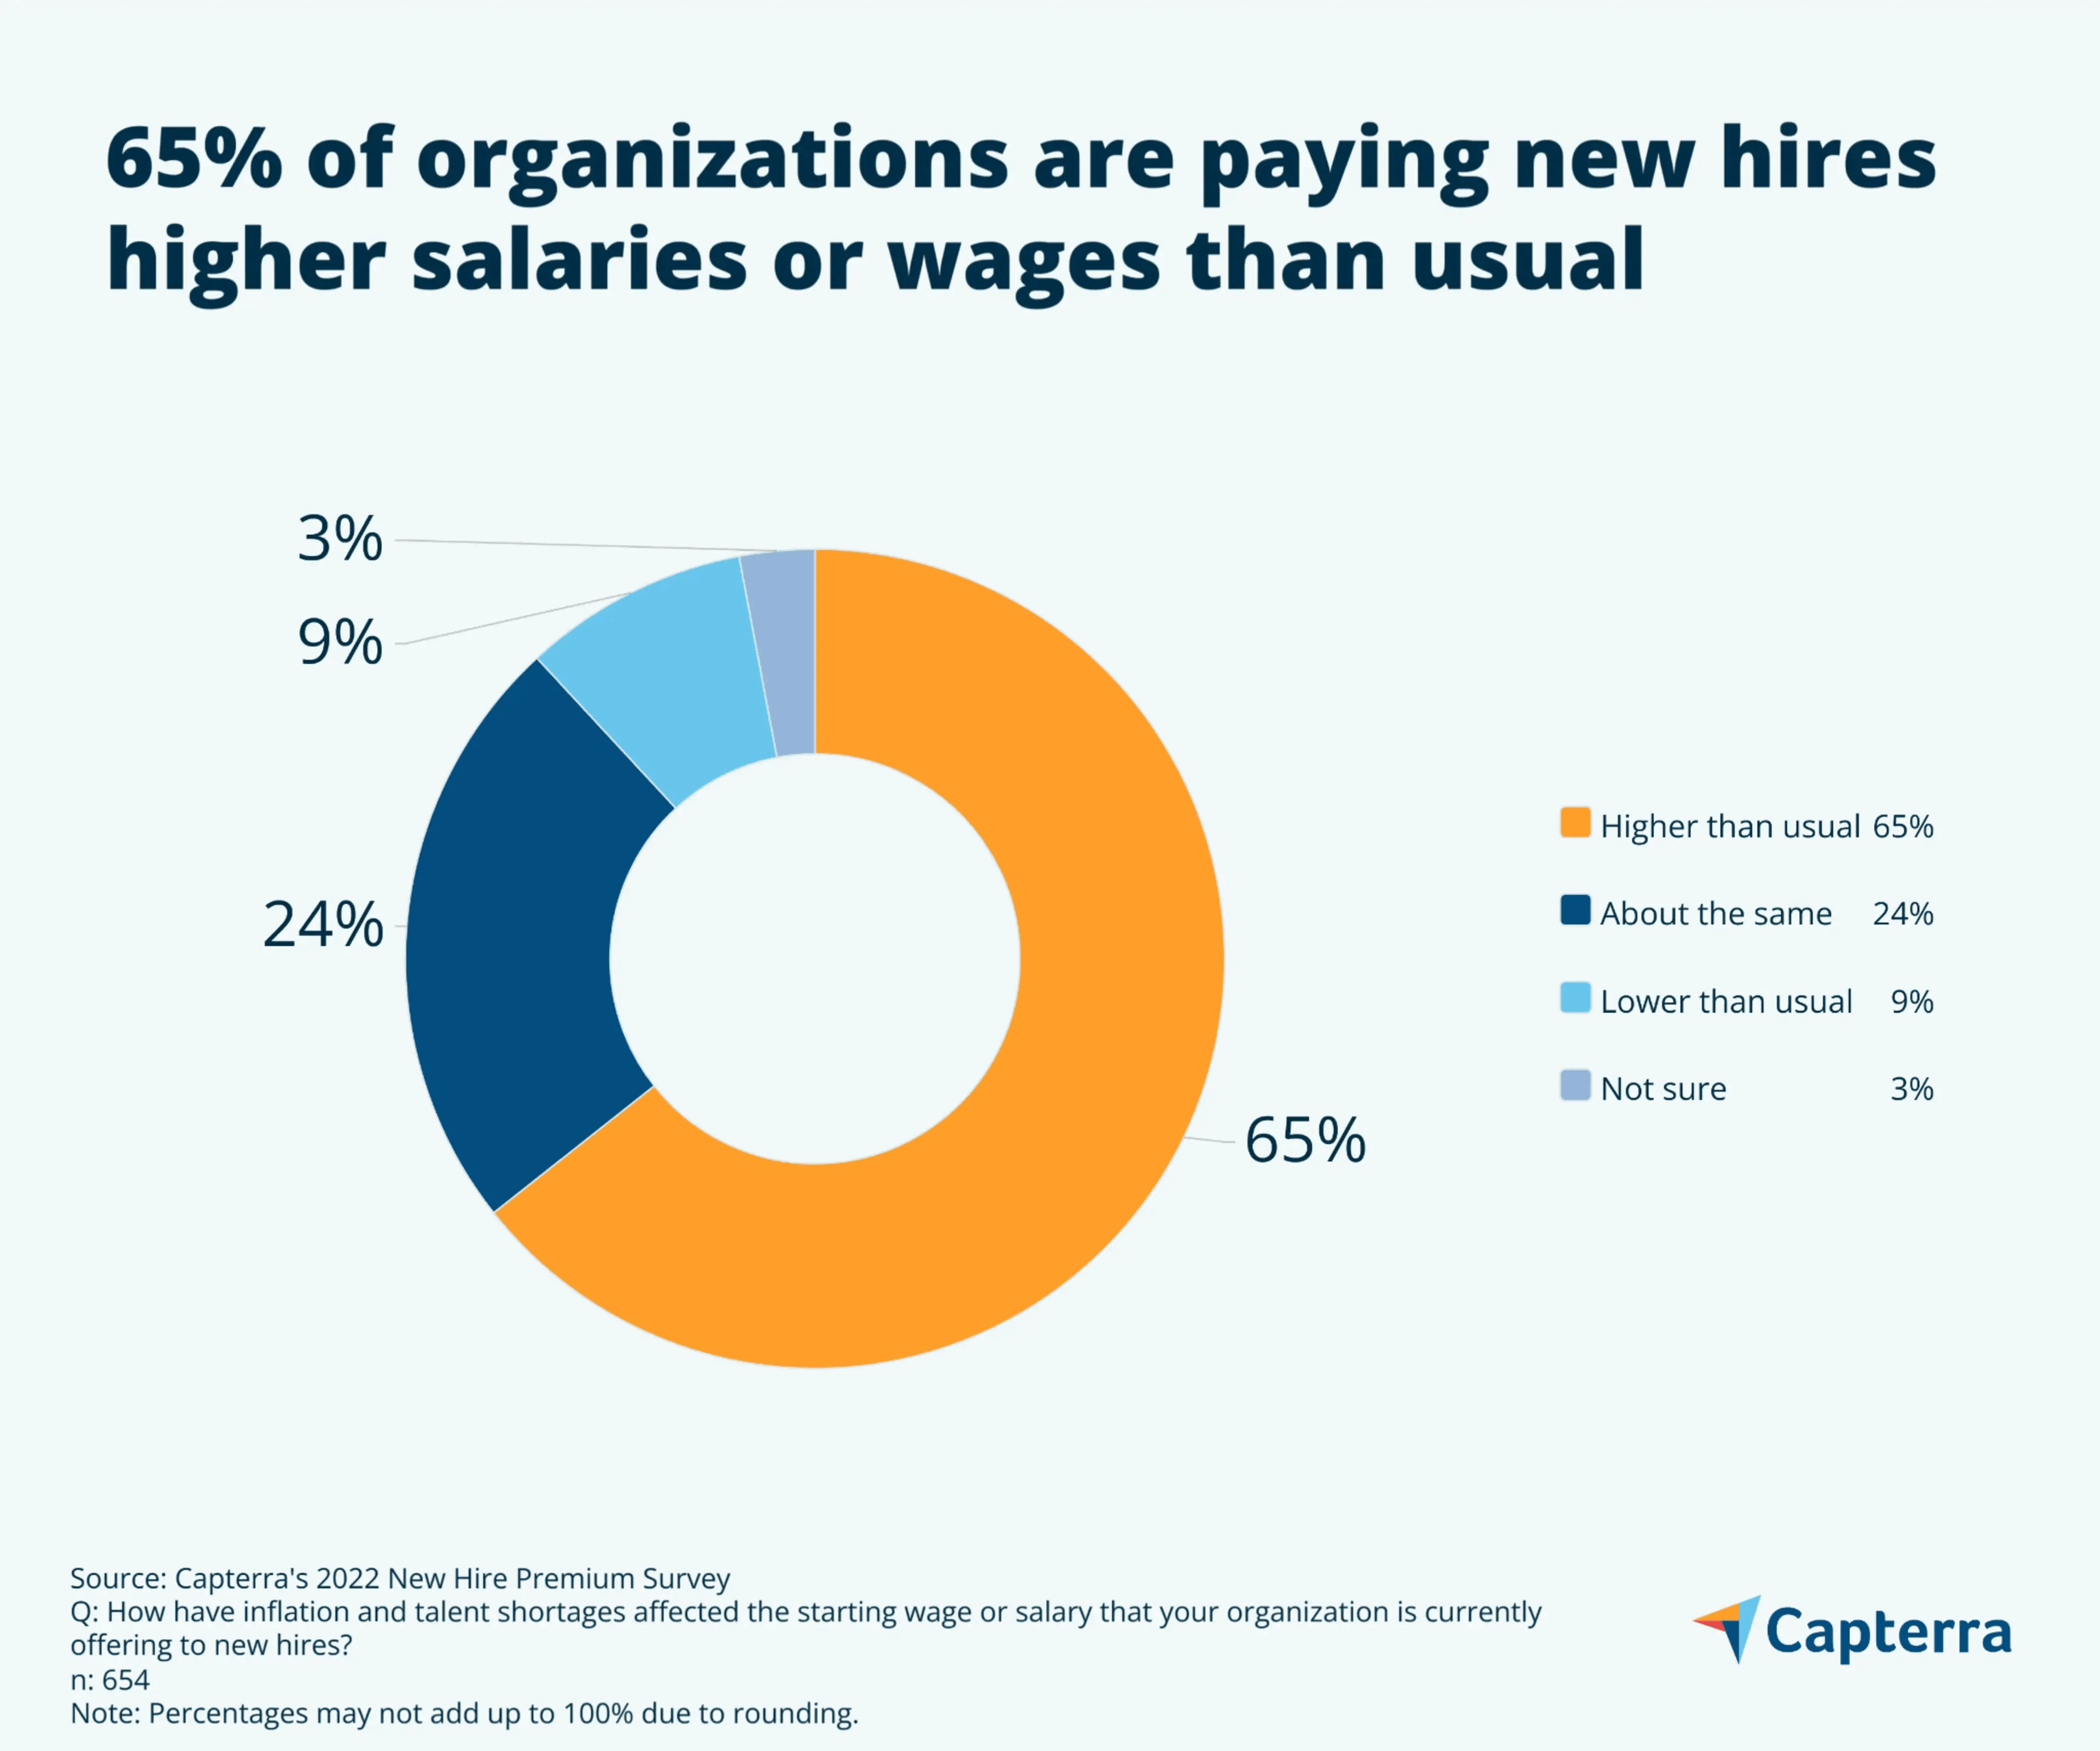 Pay inequality: 65% of companies pay new hires higher salaries